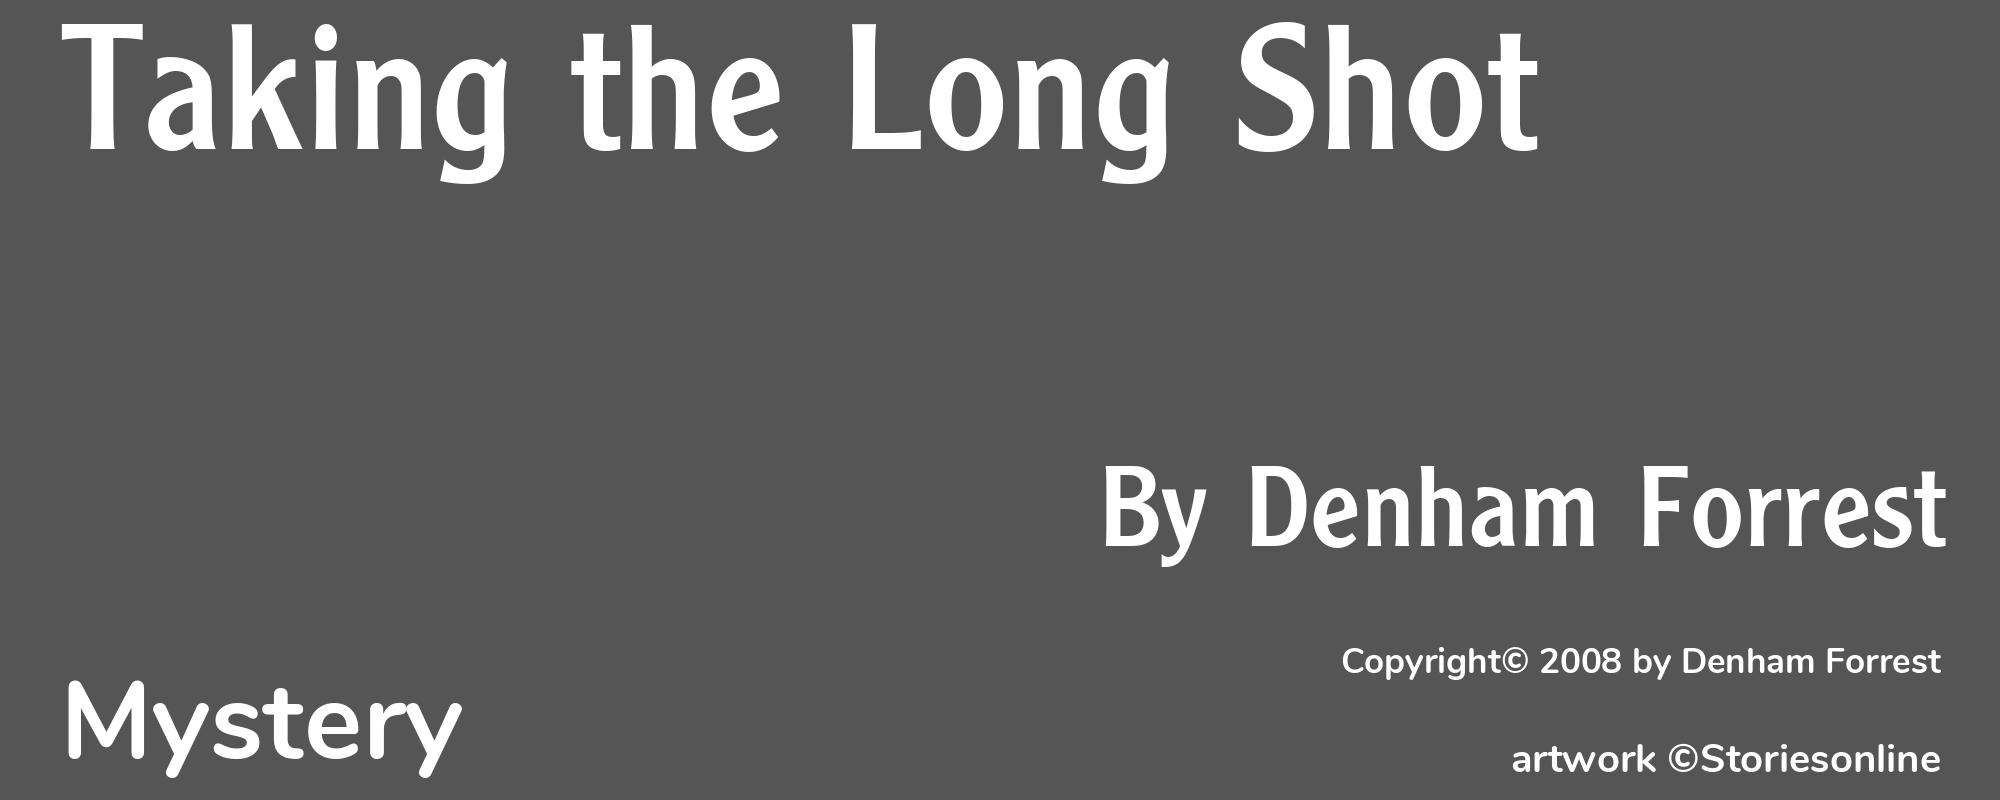 Taking the Long Shot - Cover